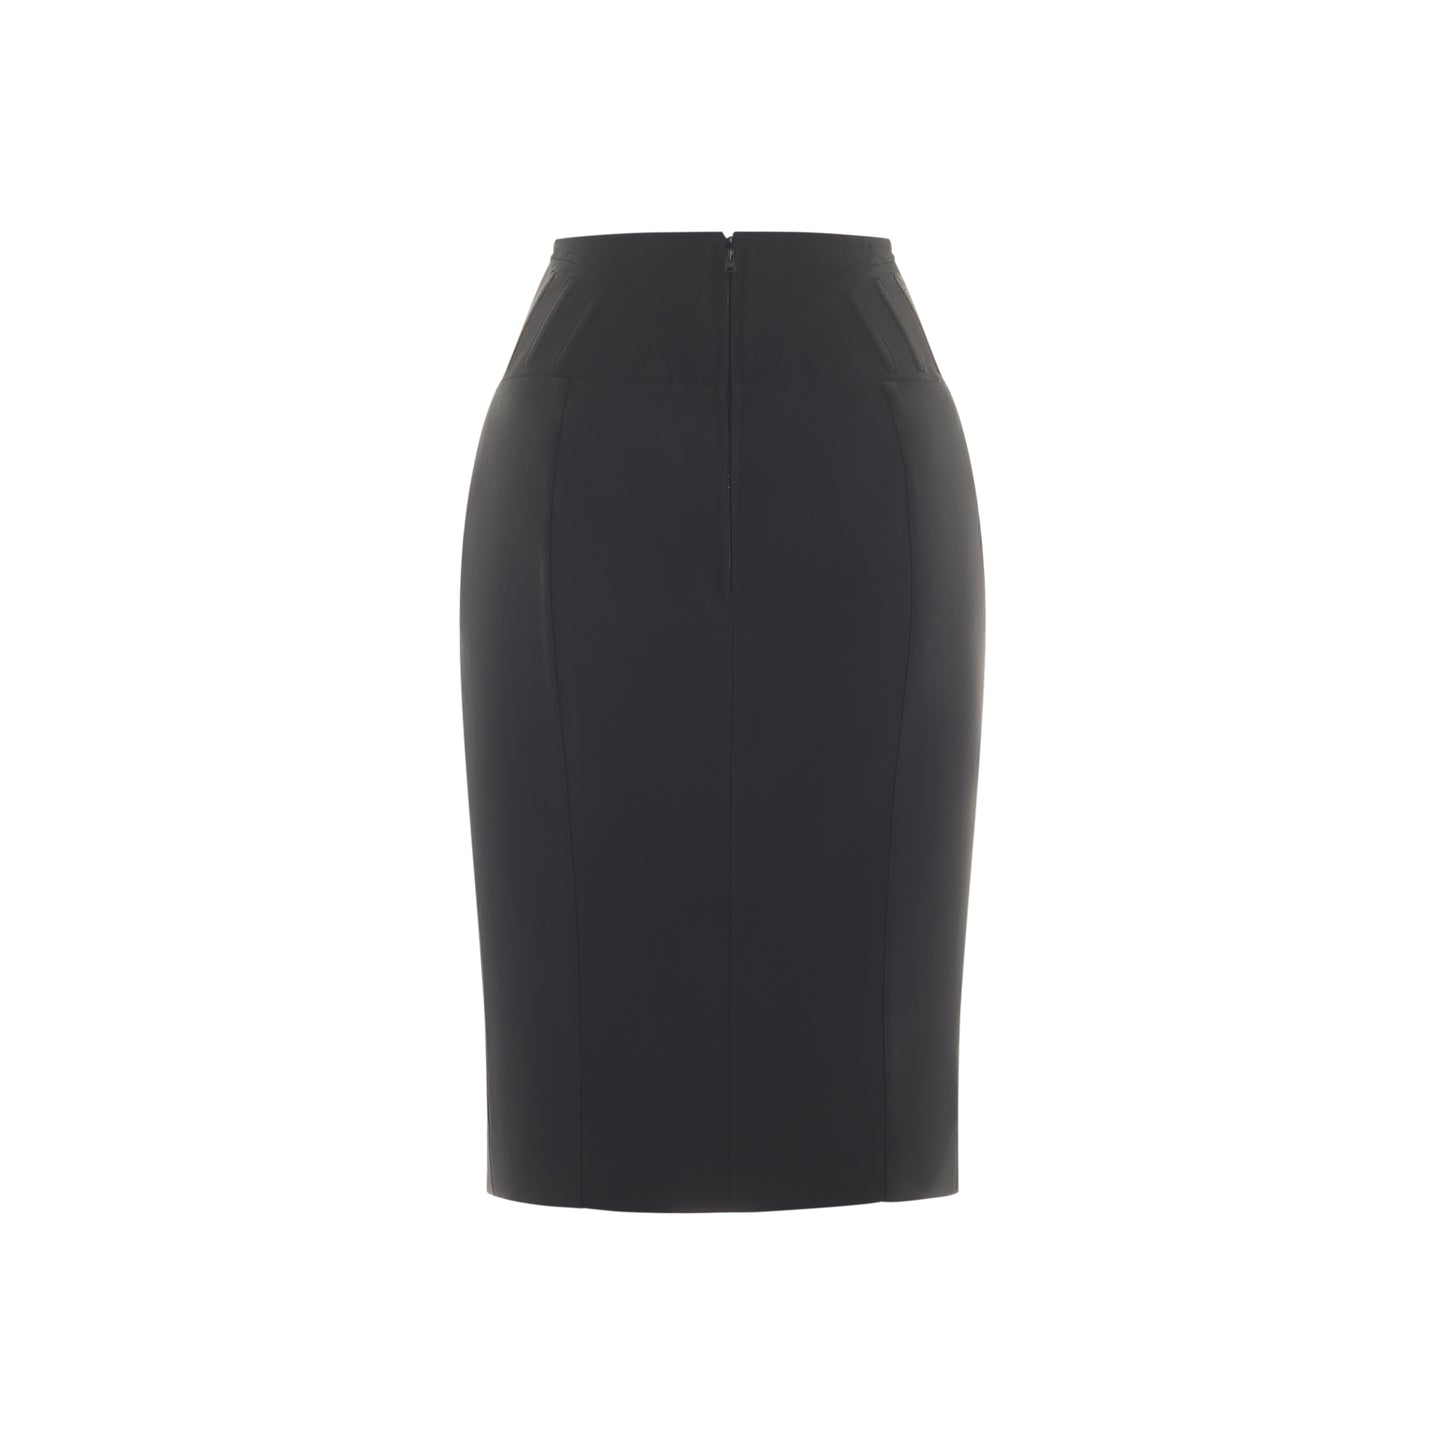 Corseted pencil skirt